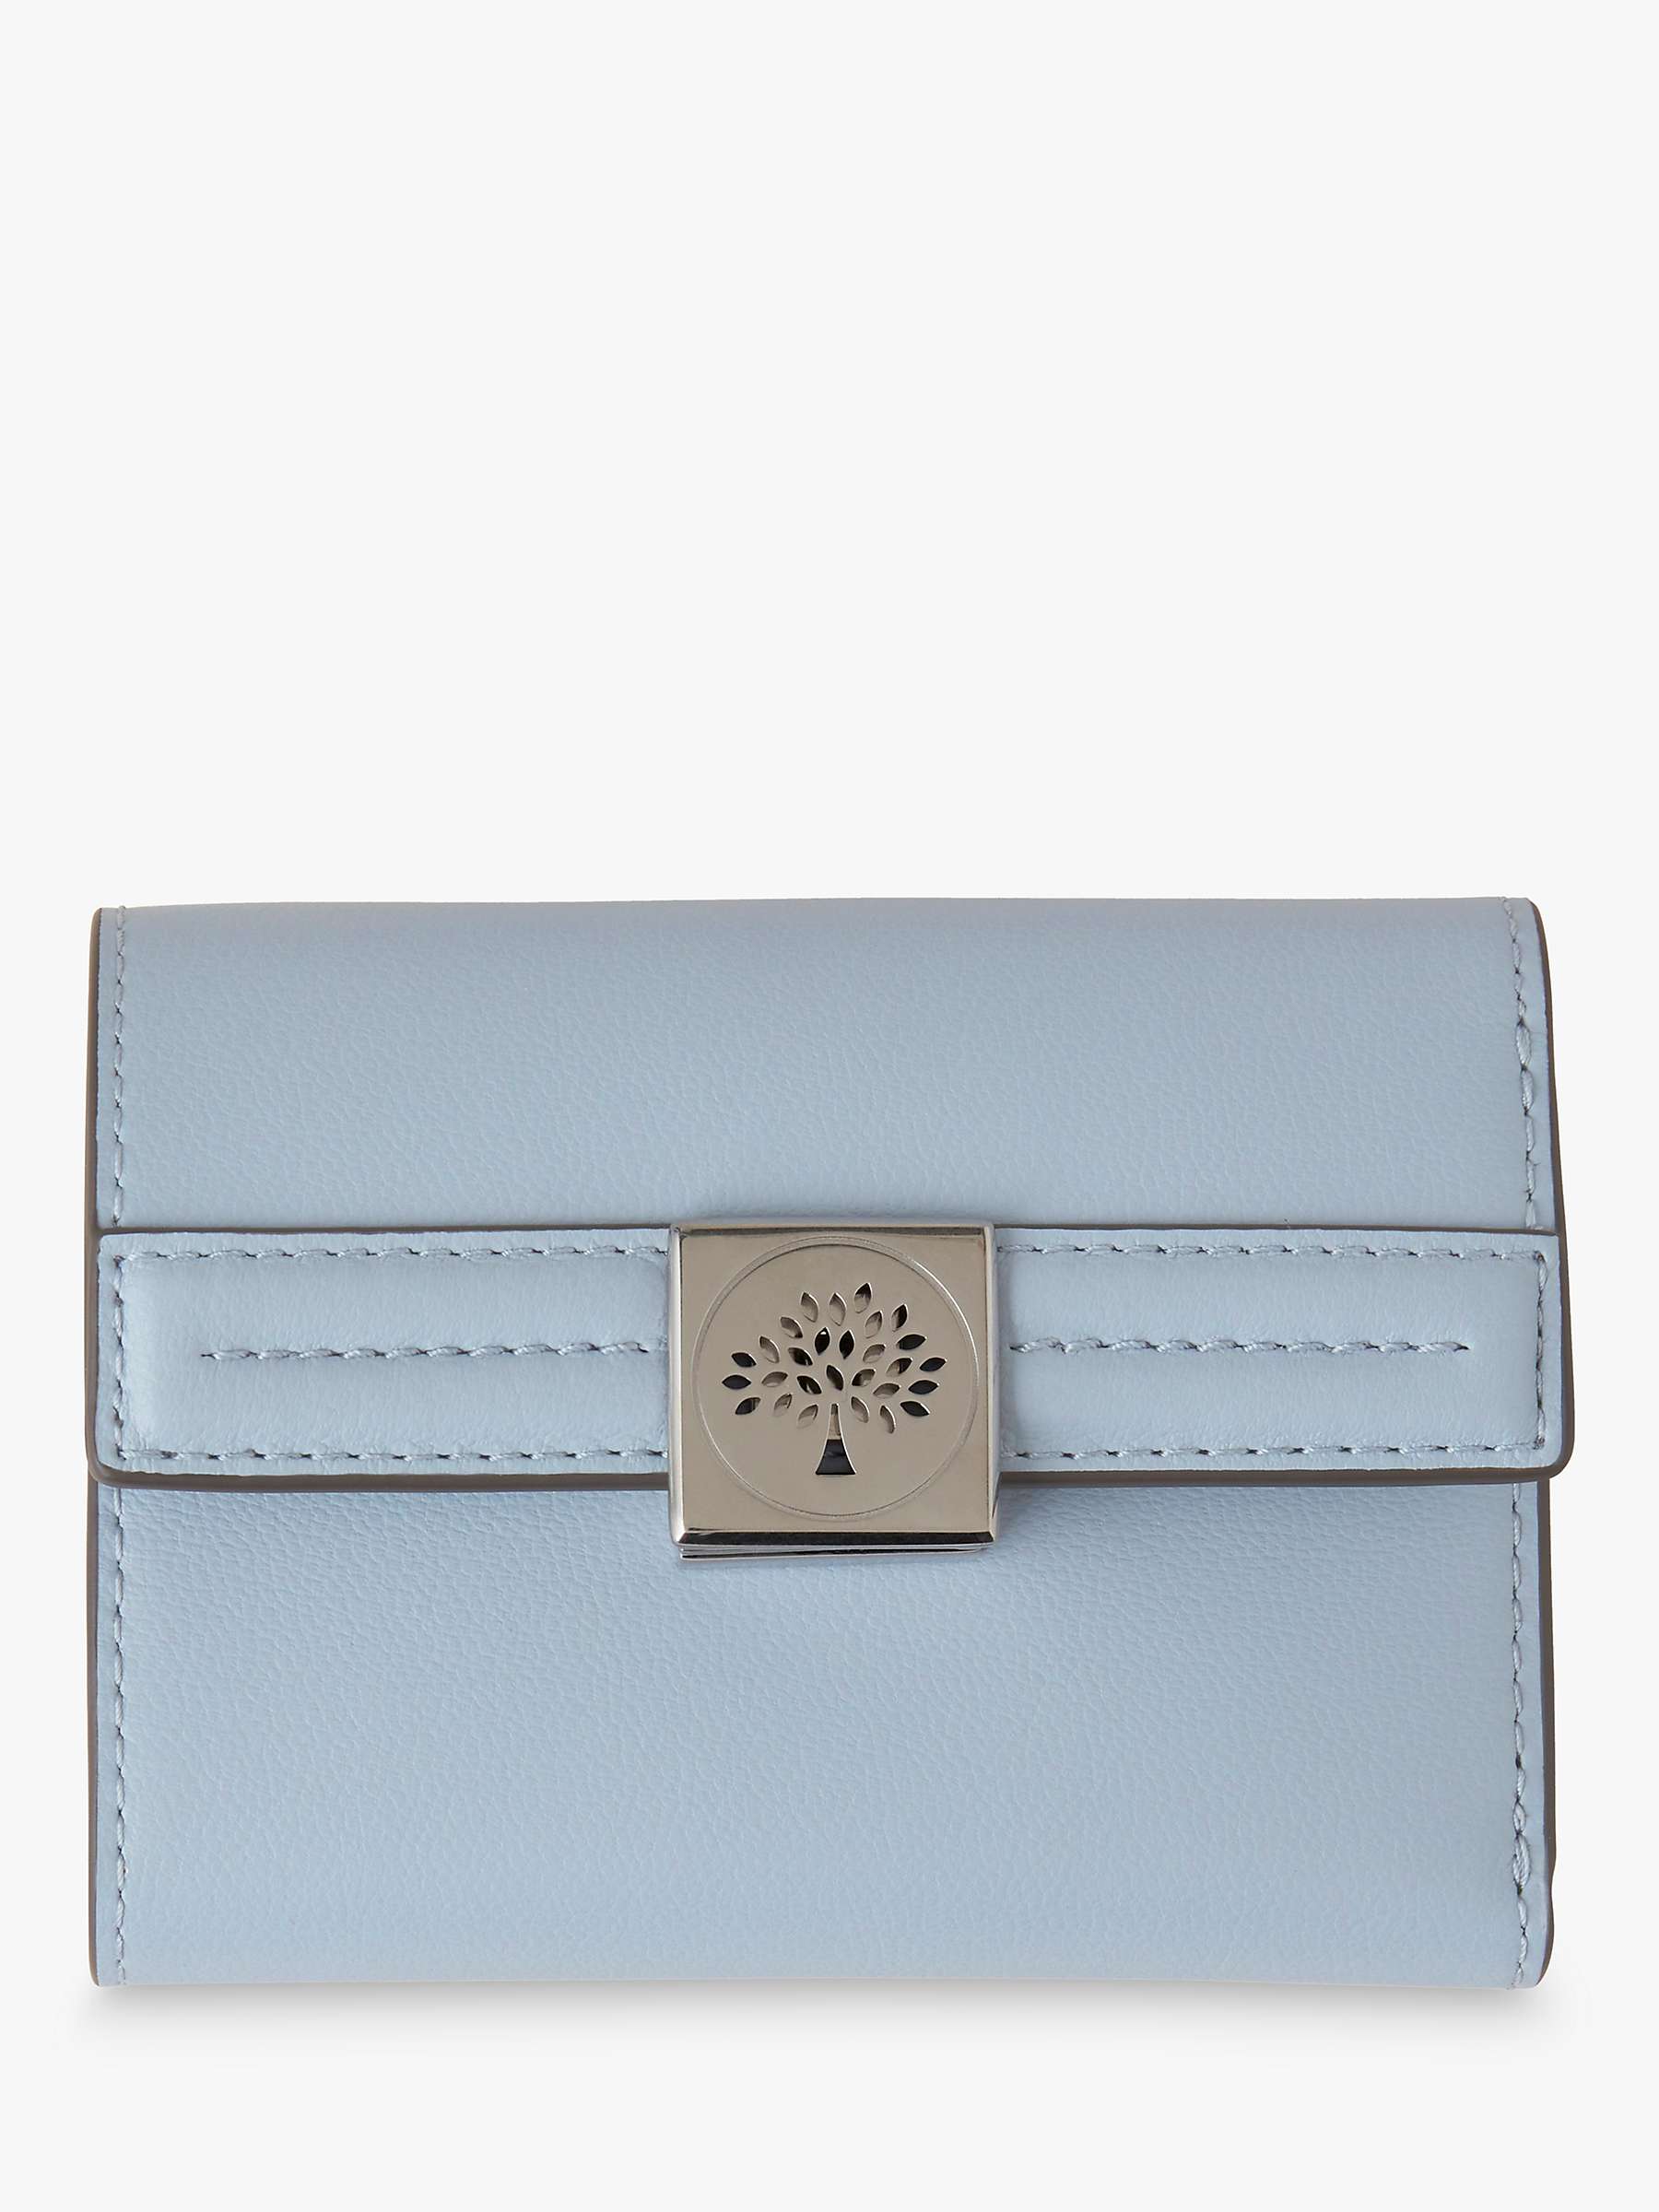 Buy Mulberry Tree Micro Classic Grain Leather Trifold Purse Online at johnlewis.com